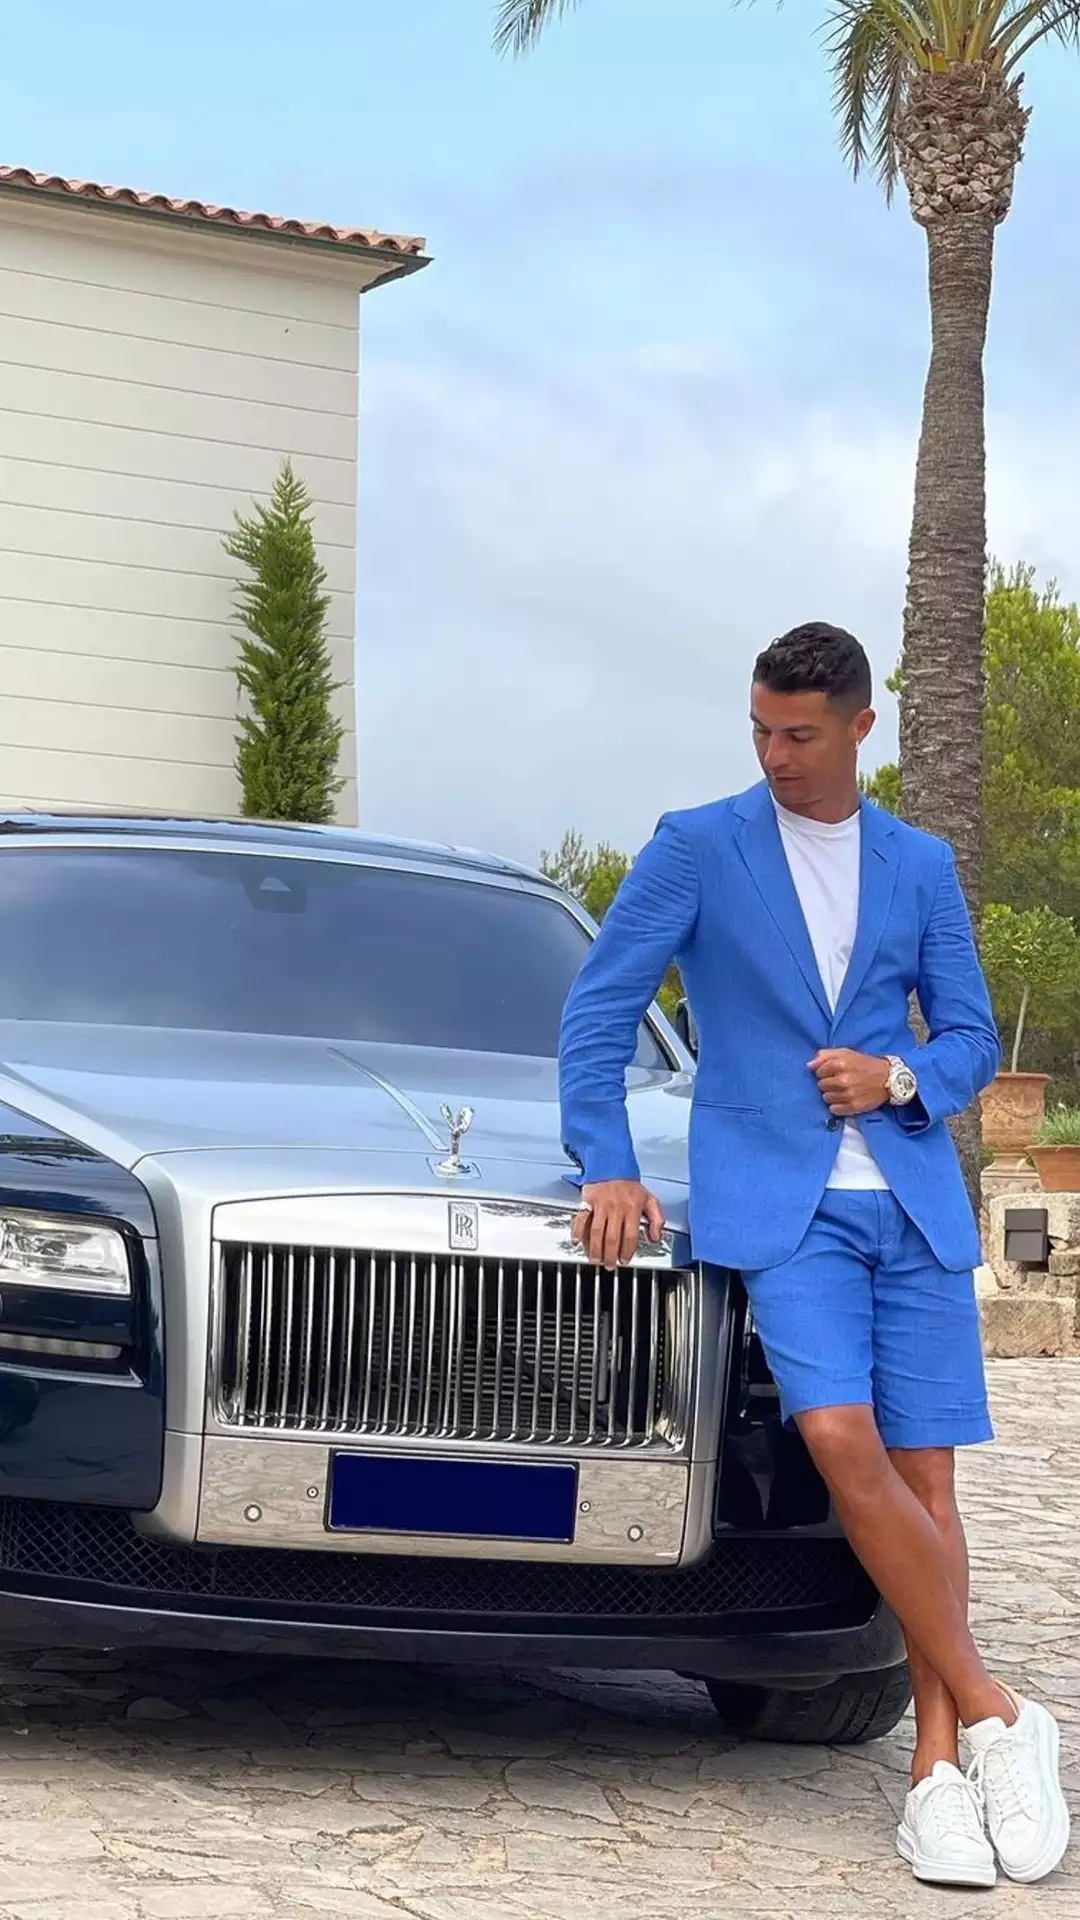 Rolls Royce Cullinan Cristiano Ronaldo has the only ultra luxury SUV Cullinan of Rolls Royce which is very beautiful to look at. Ronaldo bought this car soon after joining the Juventus Football Club.